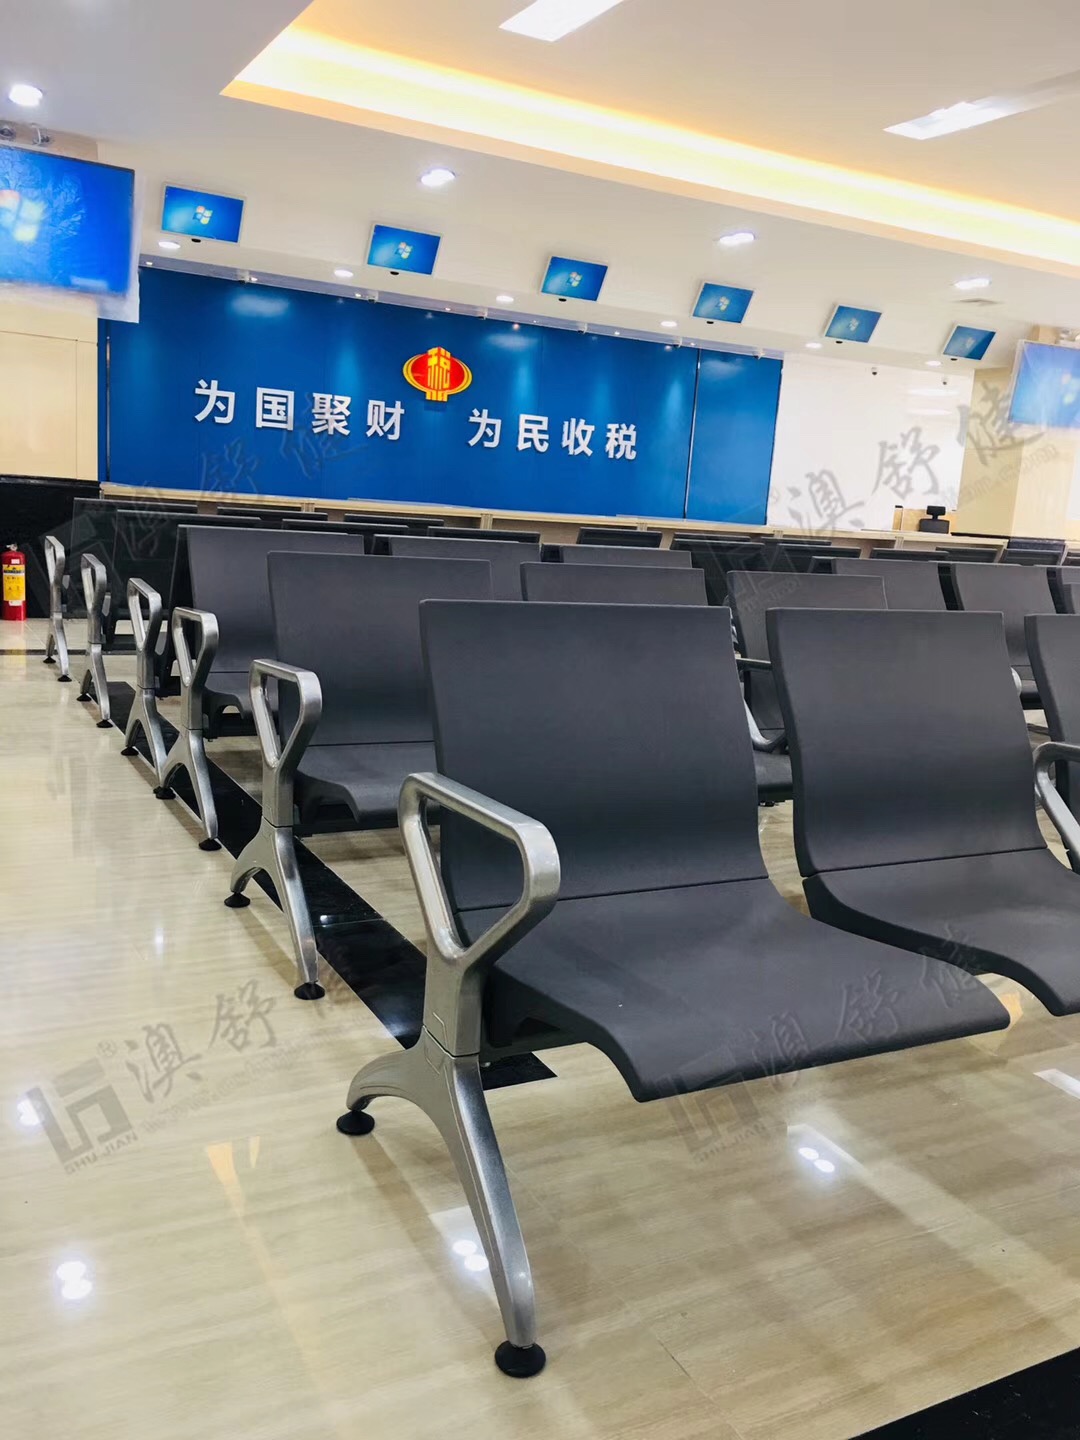 Shunde administrative service center waiting seating project(图4)